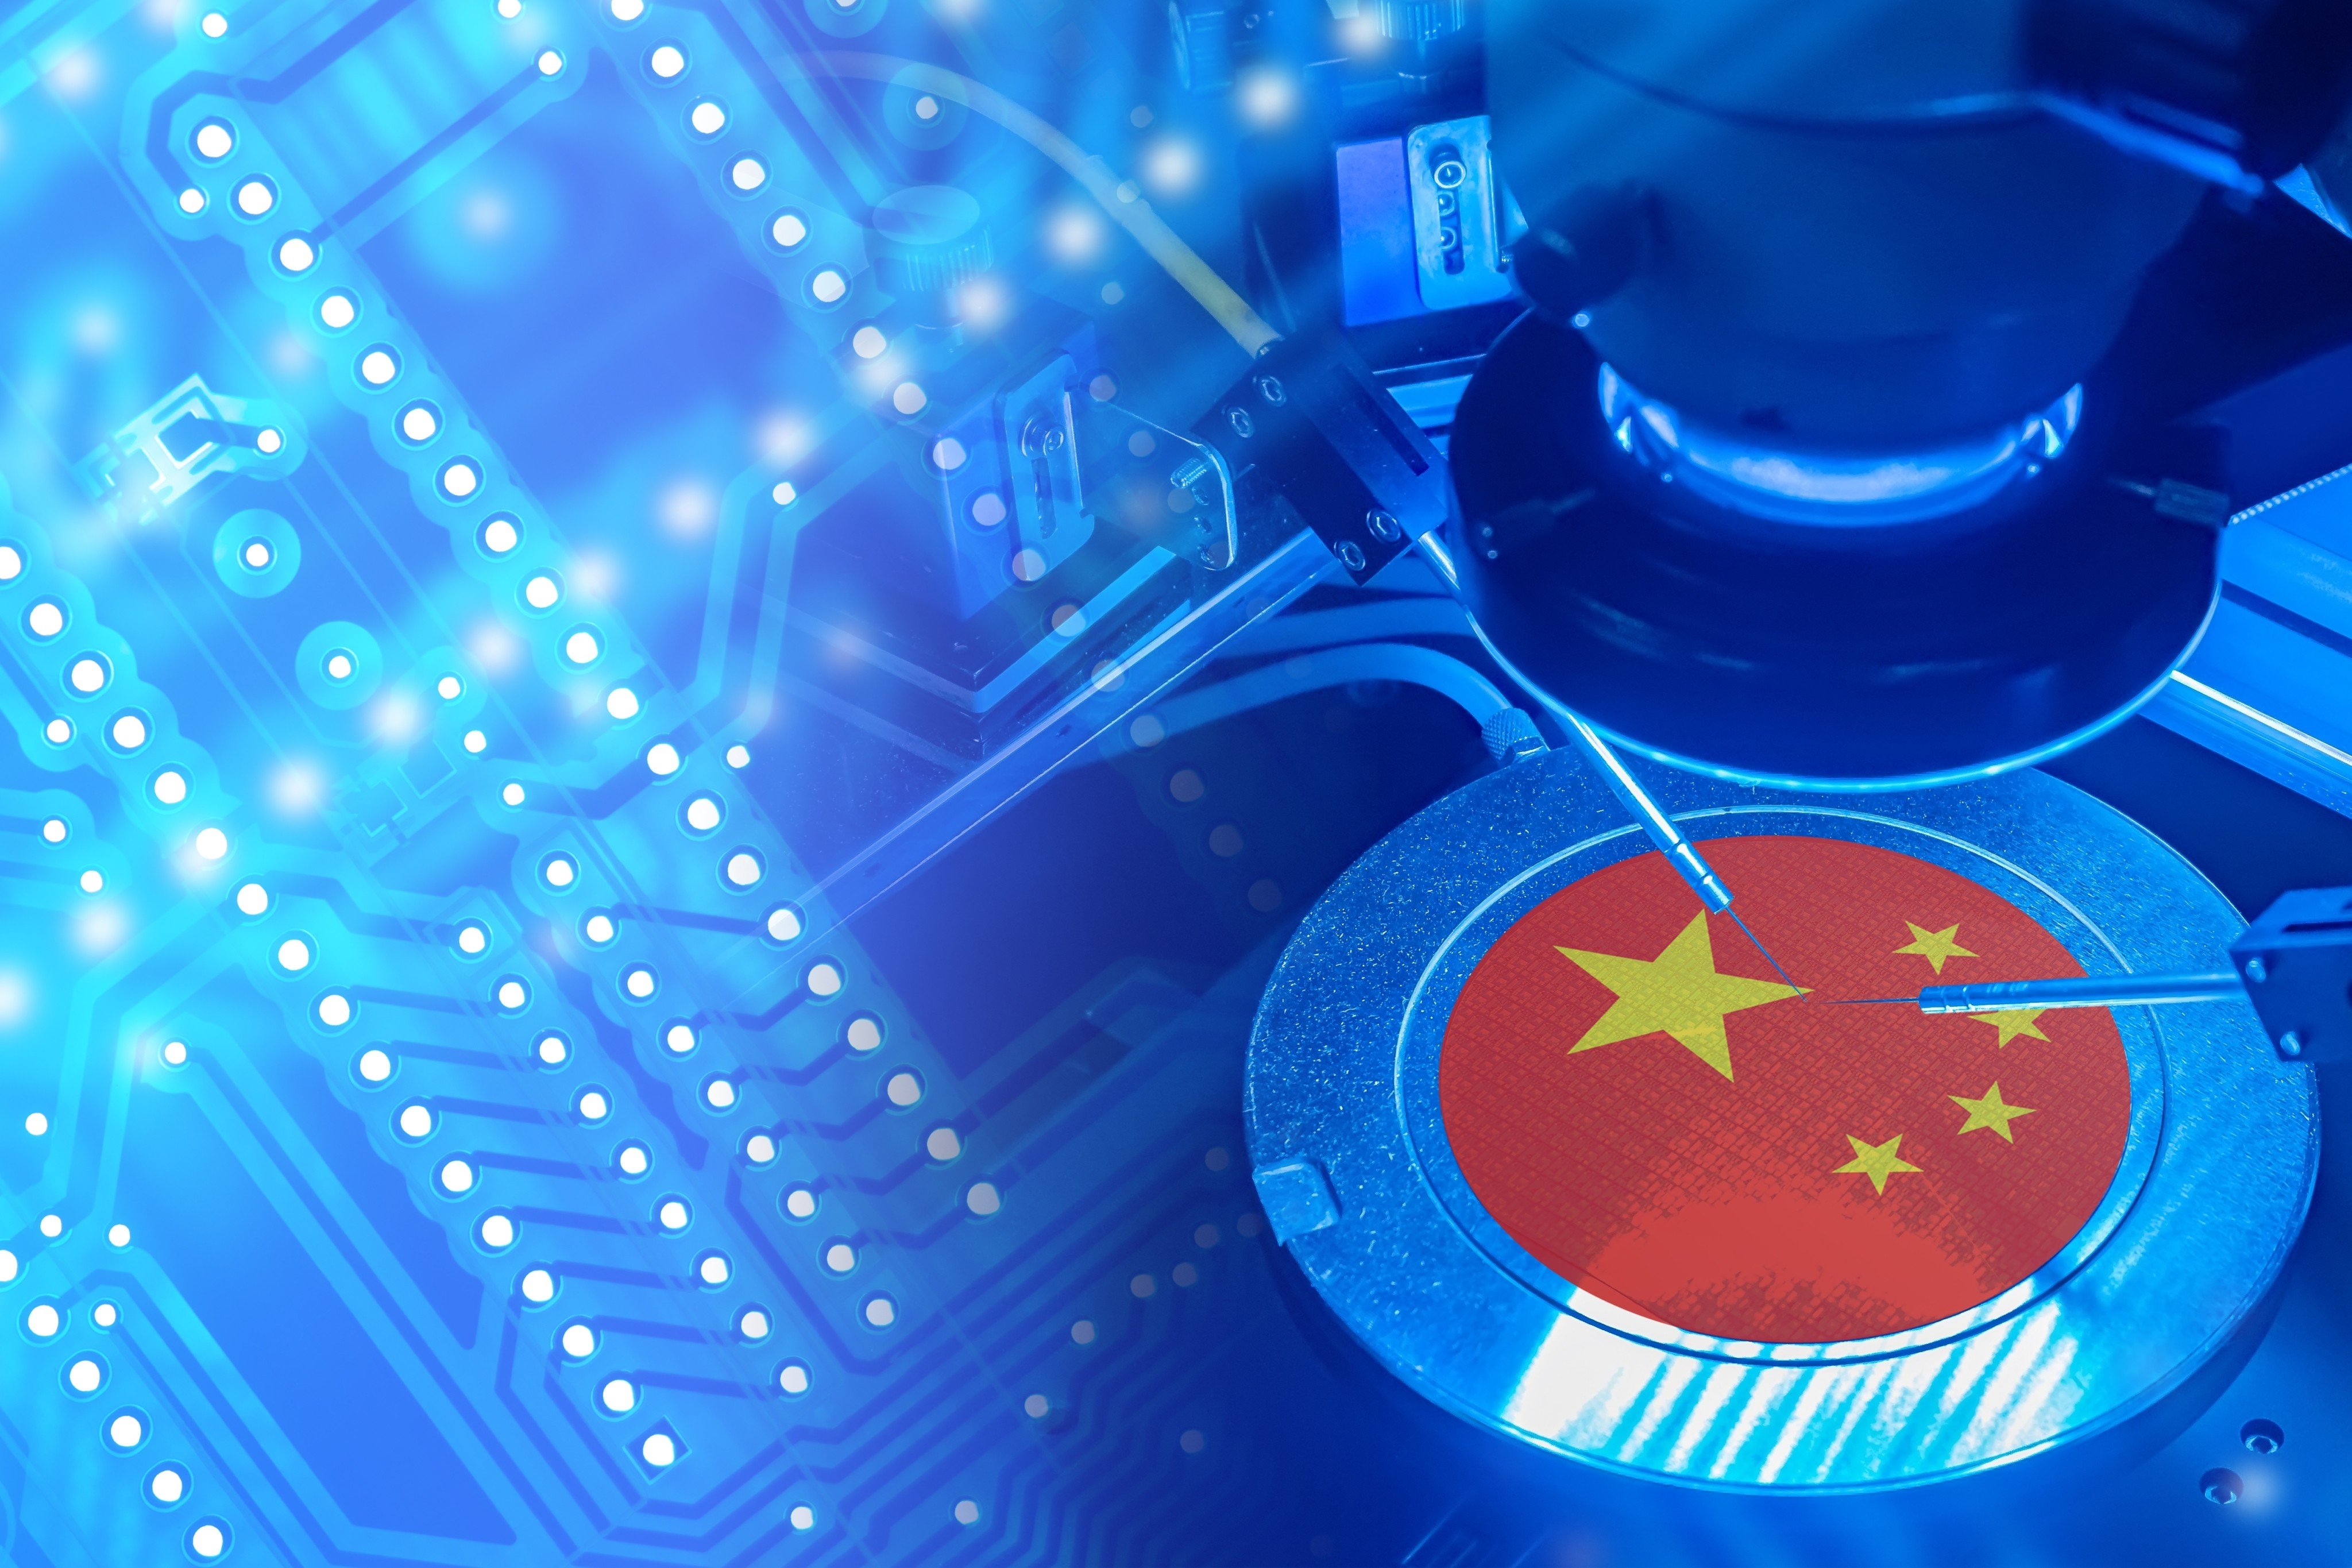 China doled out more than US$1.5 billion in subsidies to chip companies last year as it seeks semiconductor self-sufficiency. Photo: Shutterstock